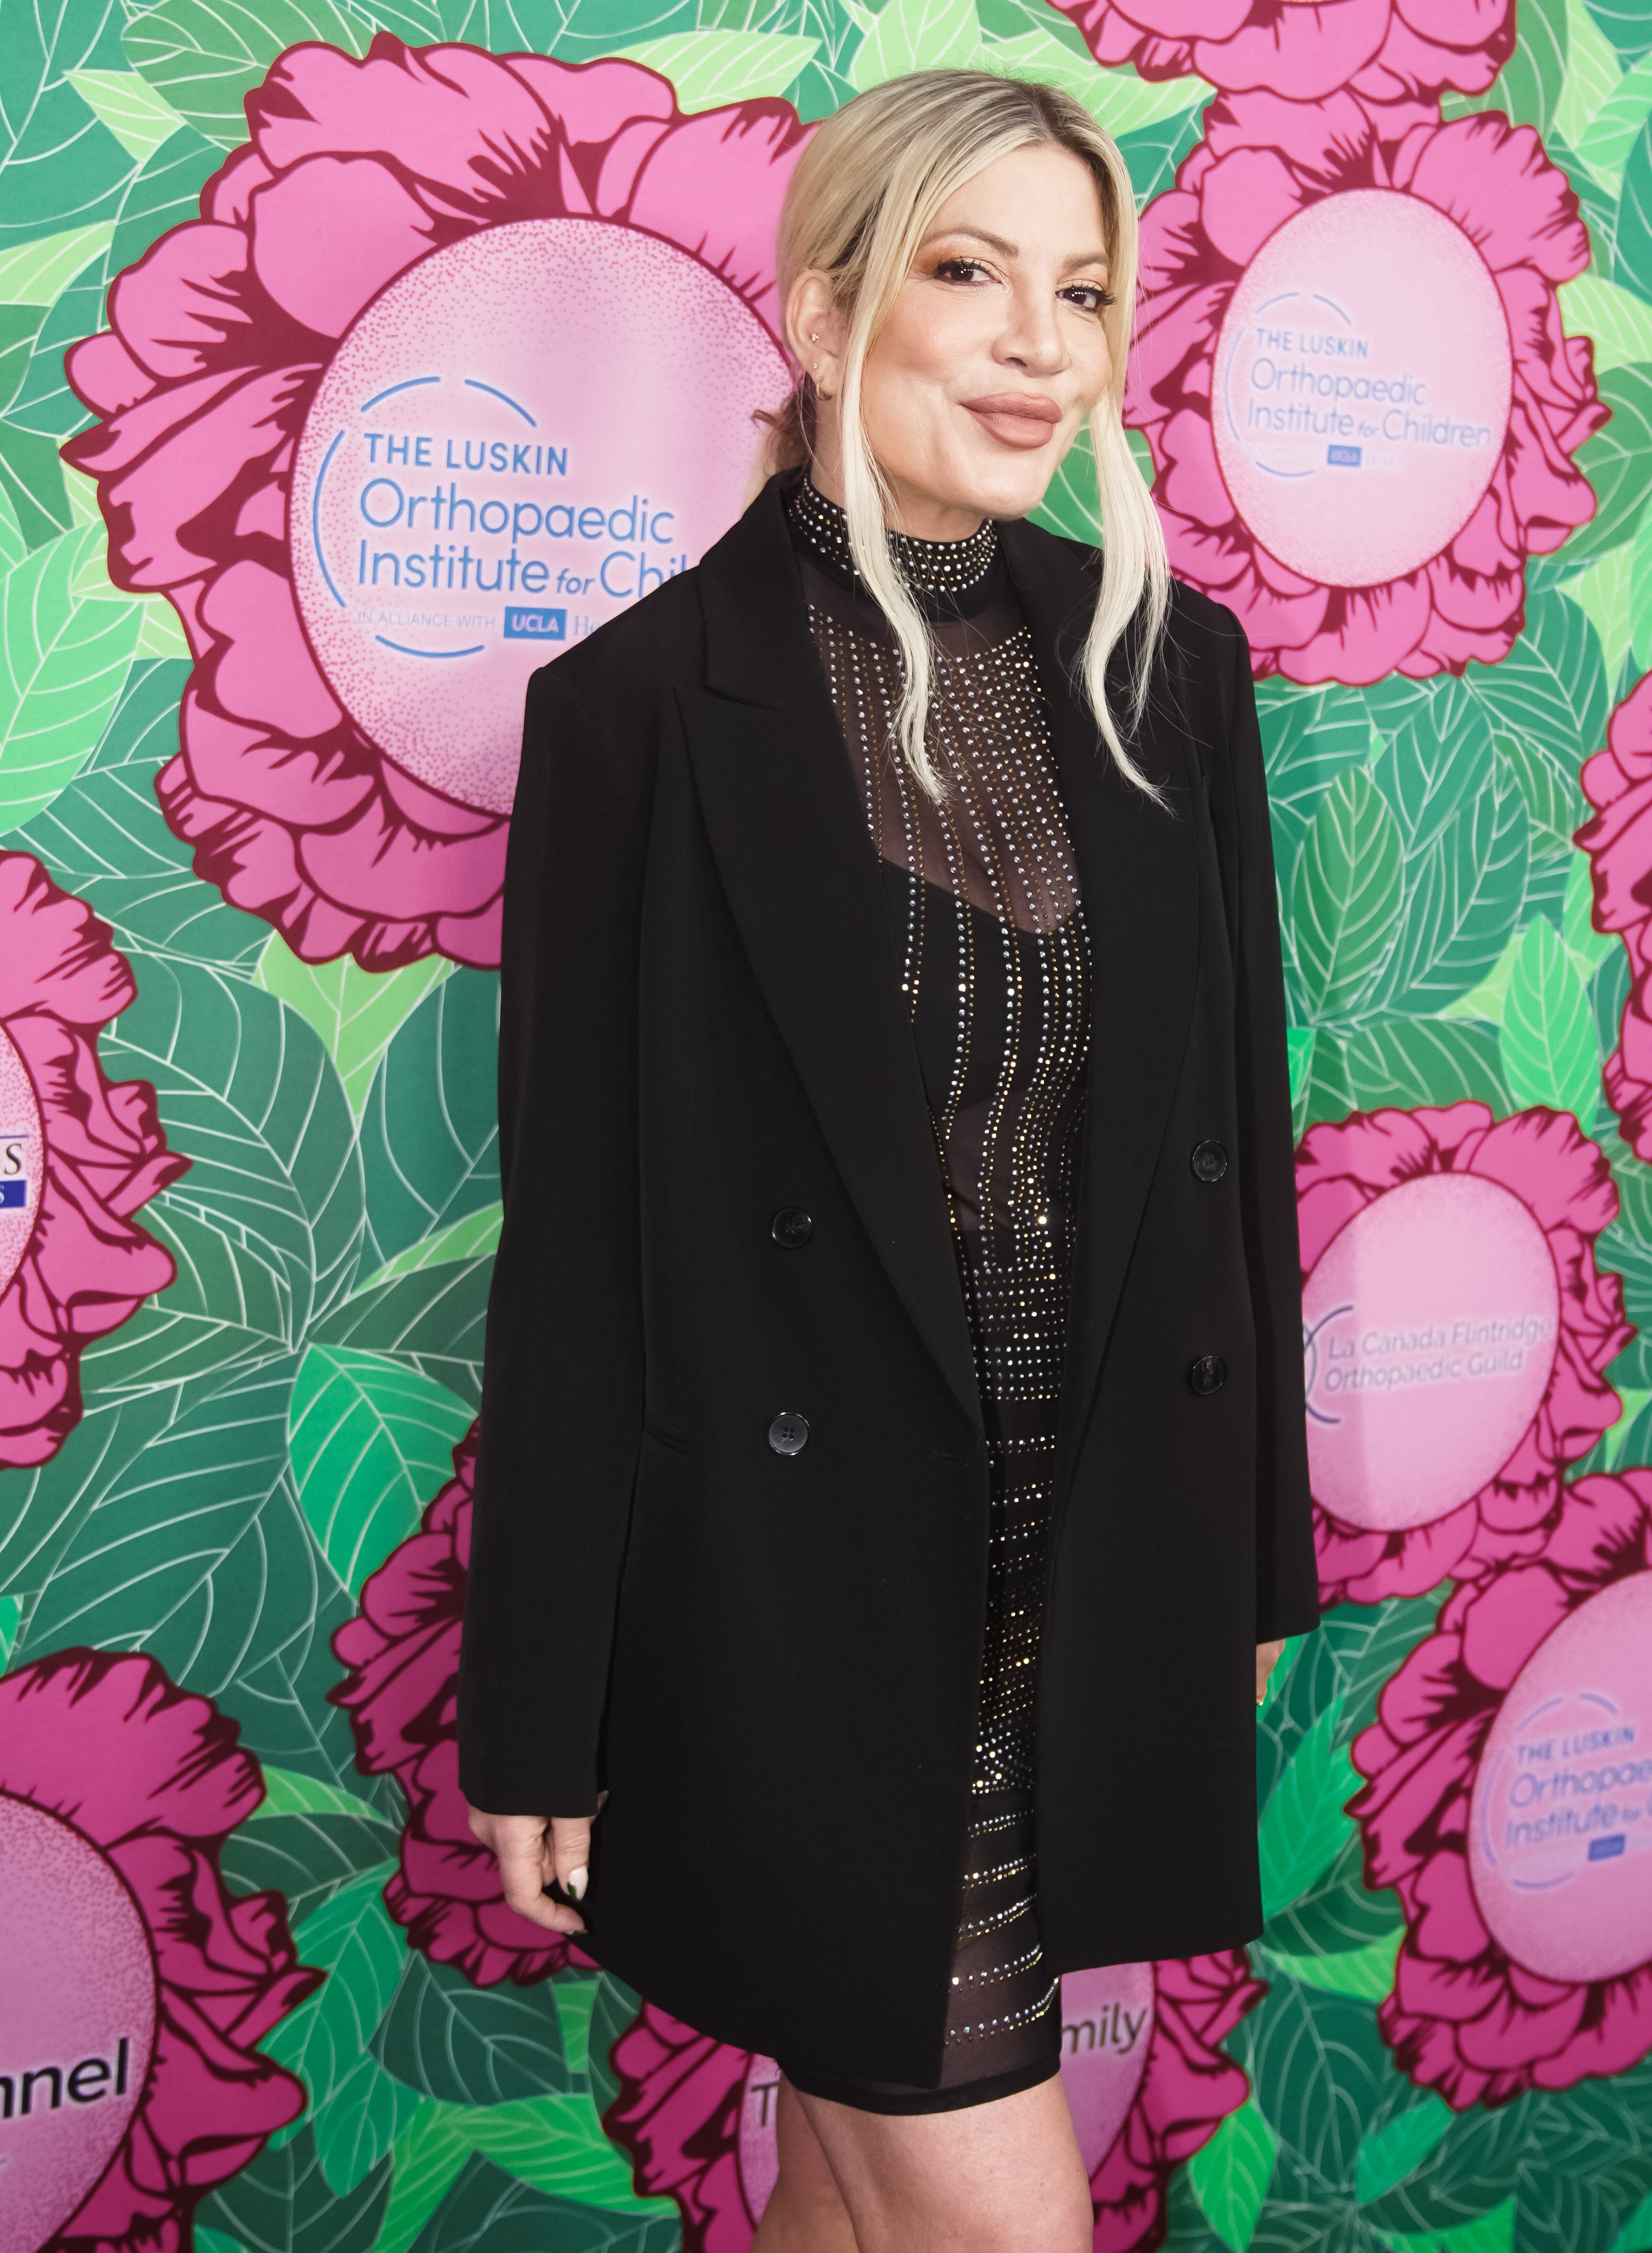 Tori Spelling in a dark blazer over a sparkling, sheer dress at an event with a floral backdrop